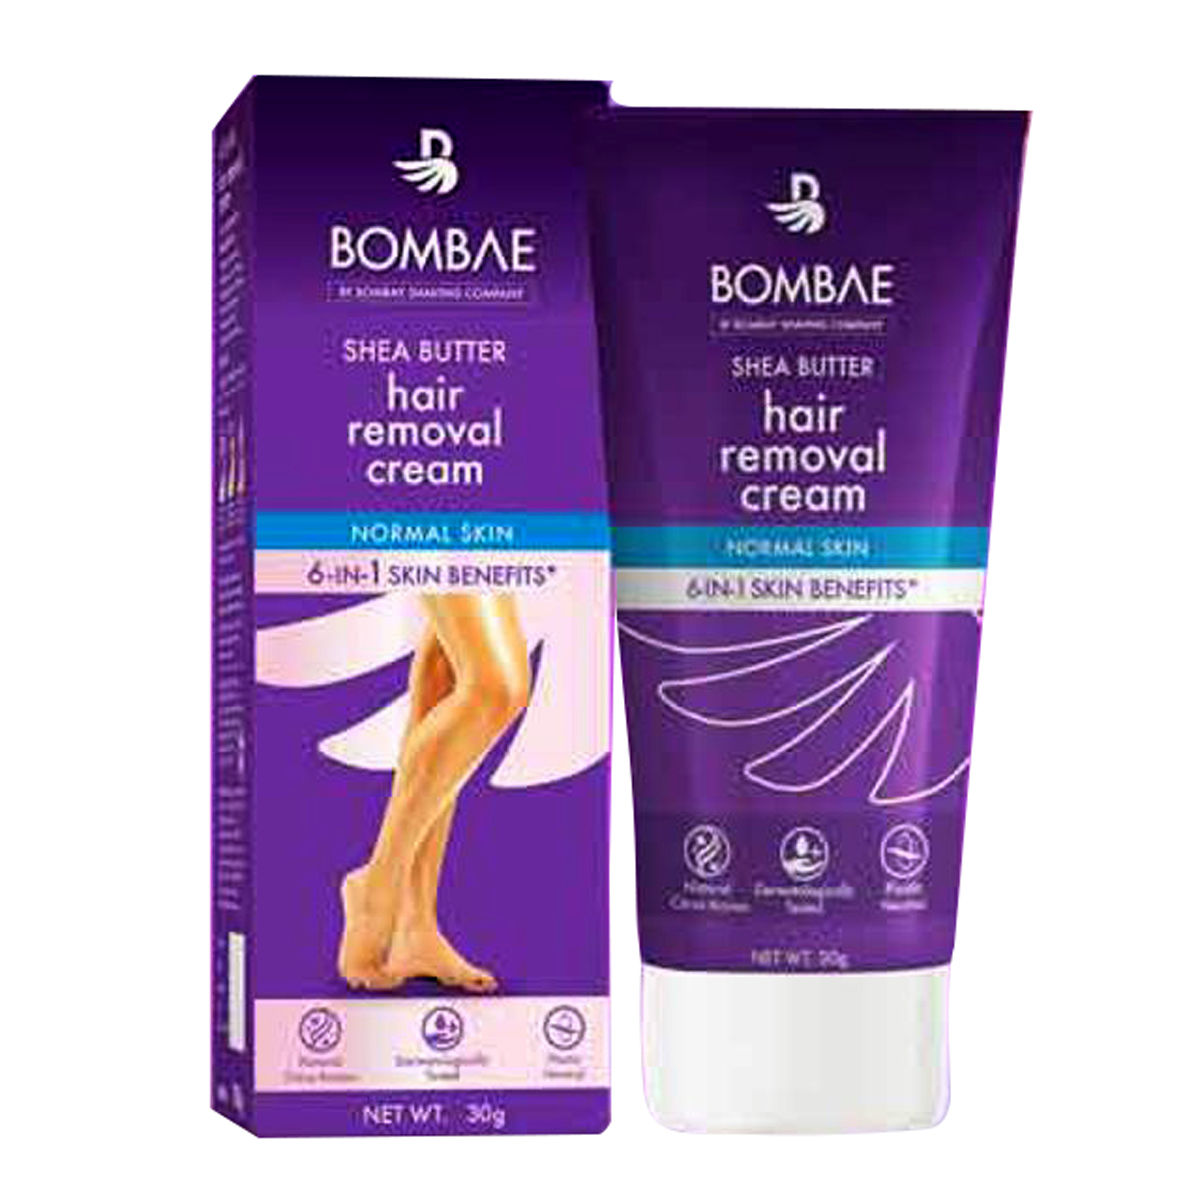 Bombay Shaving Company Shea Butter Hair Removal Cream, 30 gm Price, Uses,  Side Effects, Composition - Apollo Pharmacy